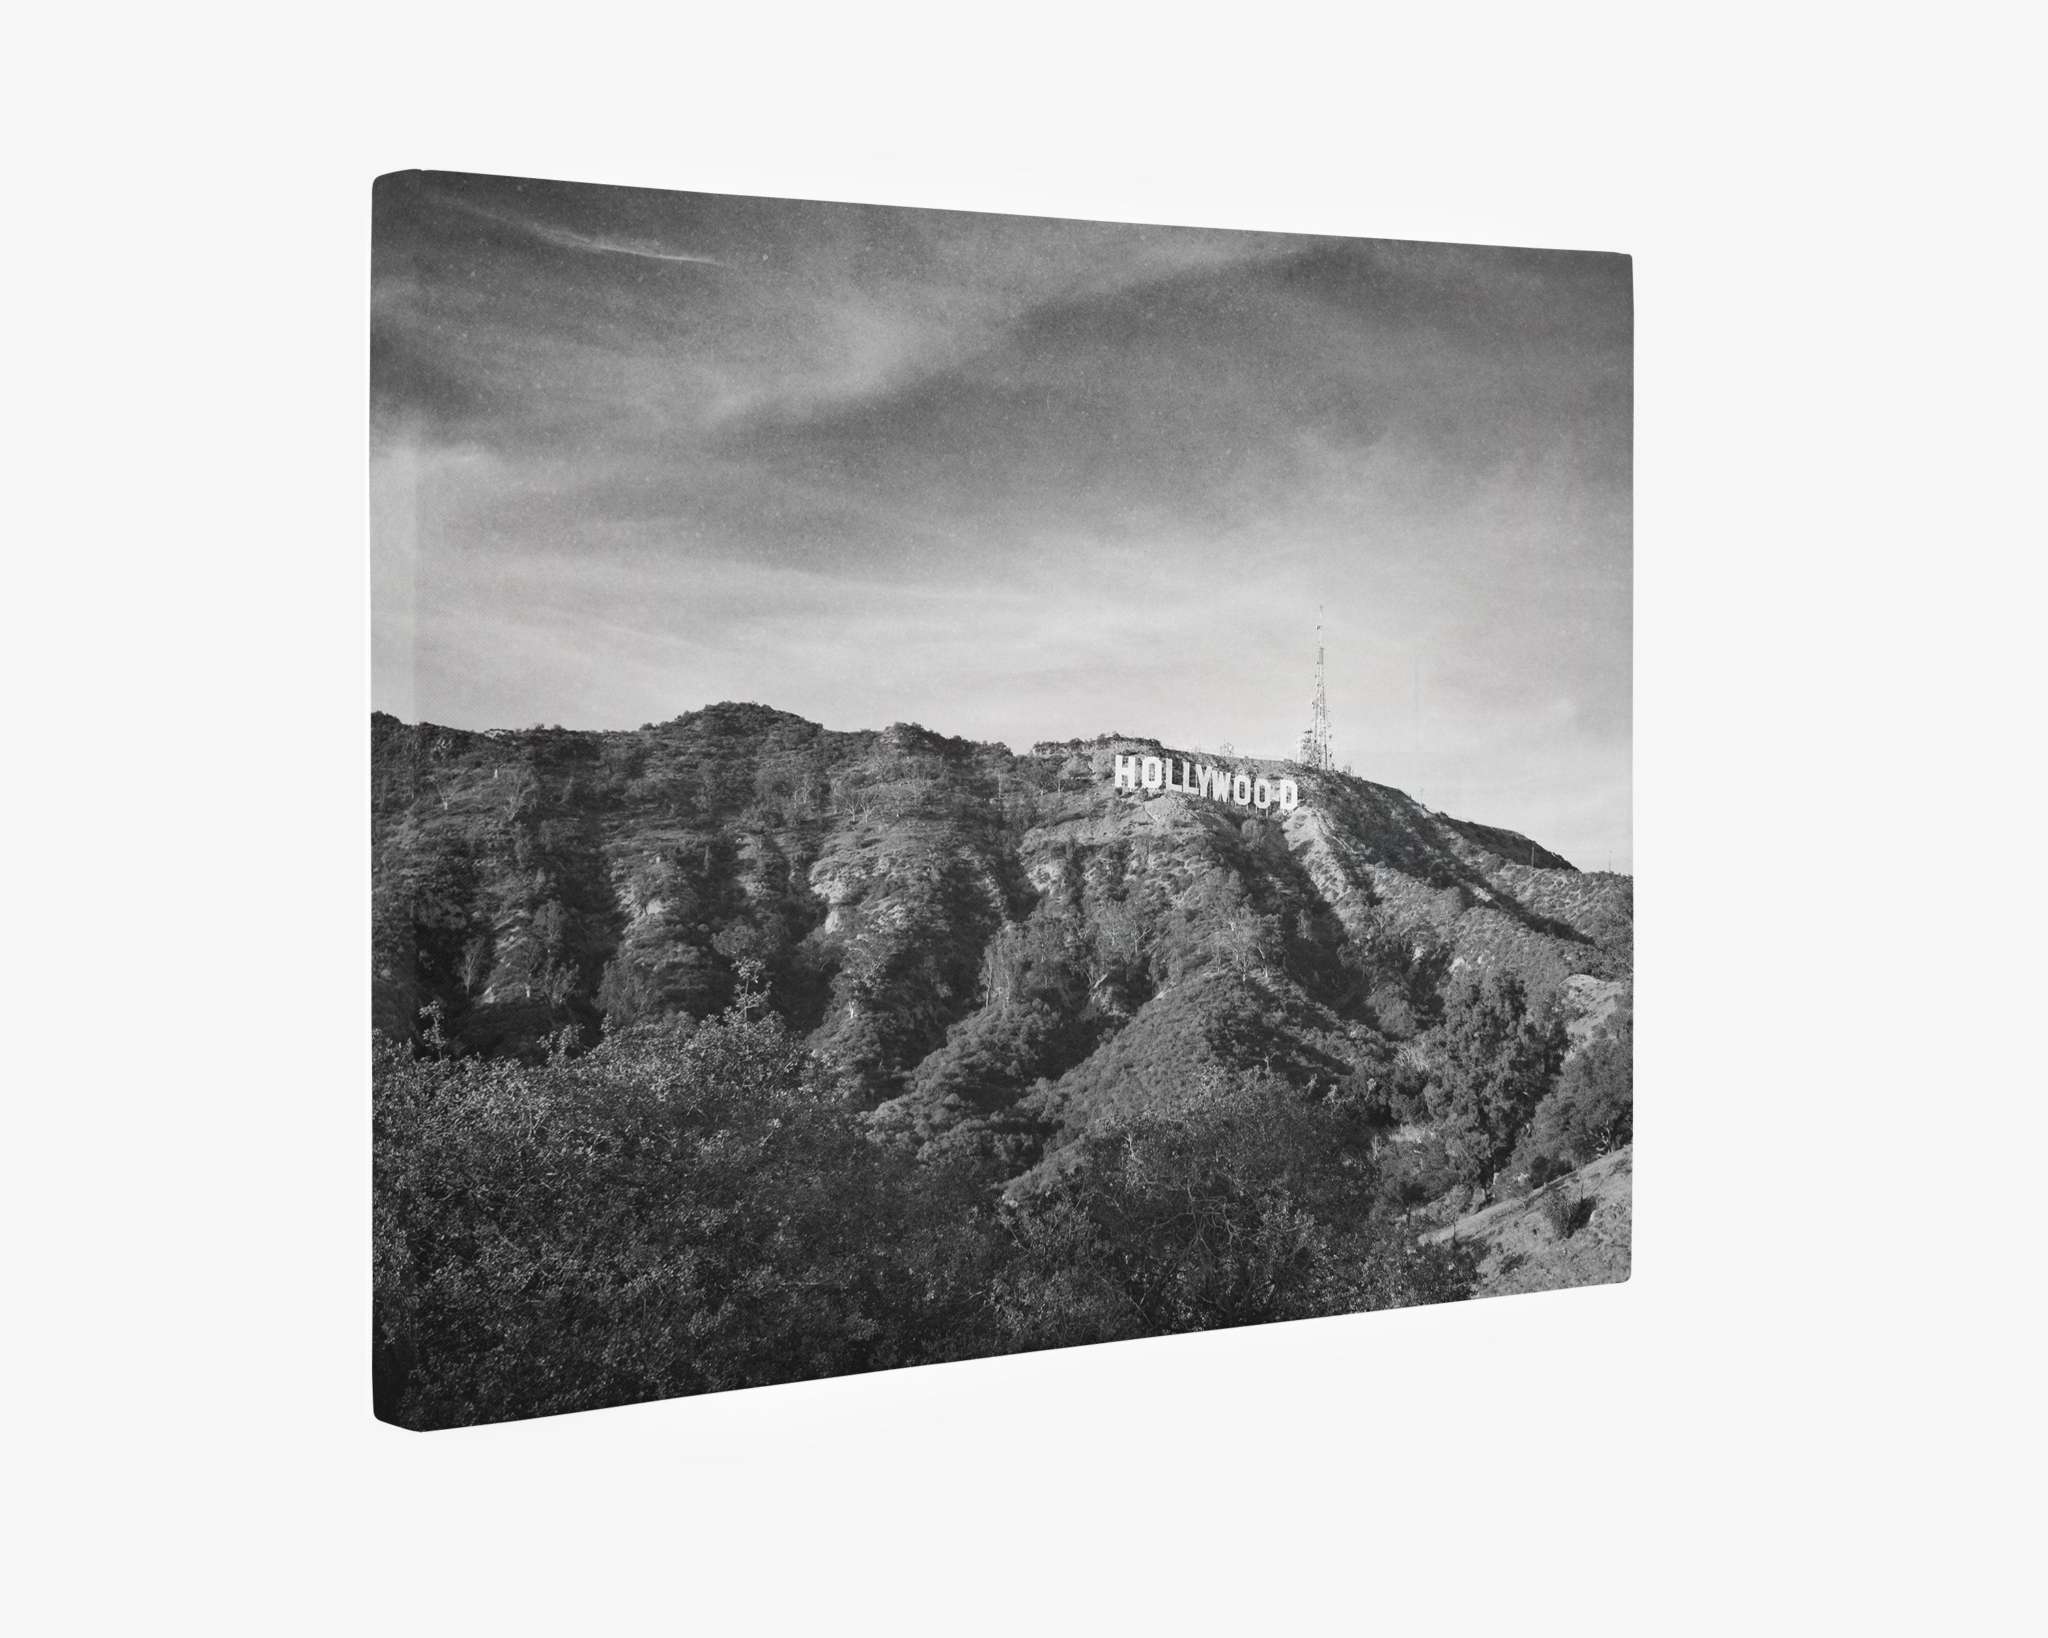 A black-and-white photograph featuring the iconic Hollywood sign perched on a hill in Los Angeles, California. The sign is surrounded by rugged hills and scraggly vegetation, set against a partly cloudy sky, reminiscent of film noir imagery. Perfect for canvas gallery wrap prints like the Hollywood Sign Black and White Vintage Wall Art, 'Old Hollywood' by Offley Green.